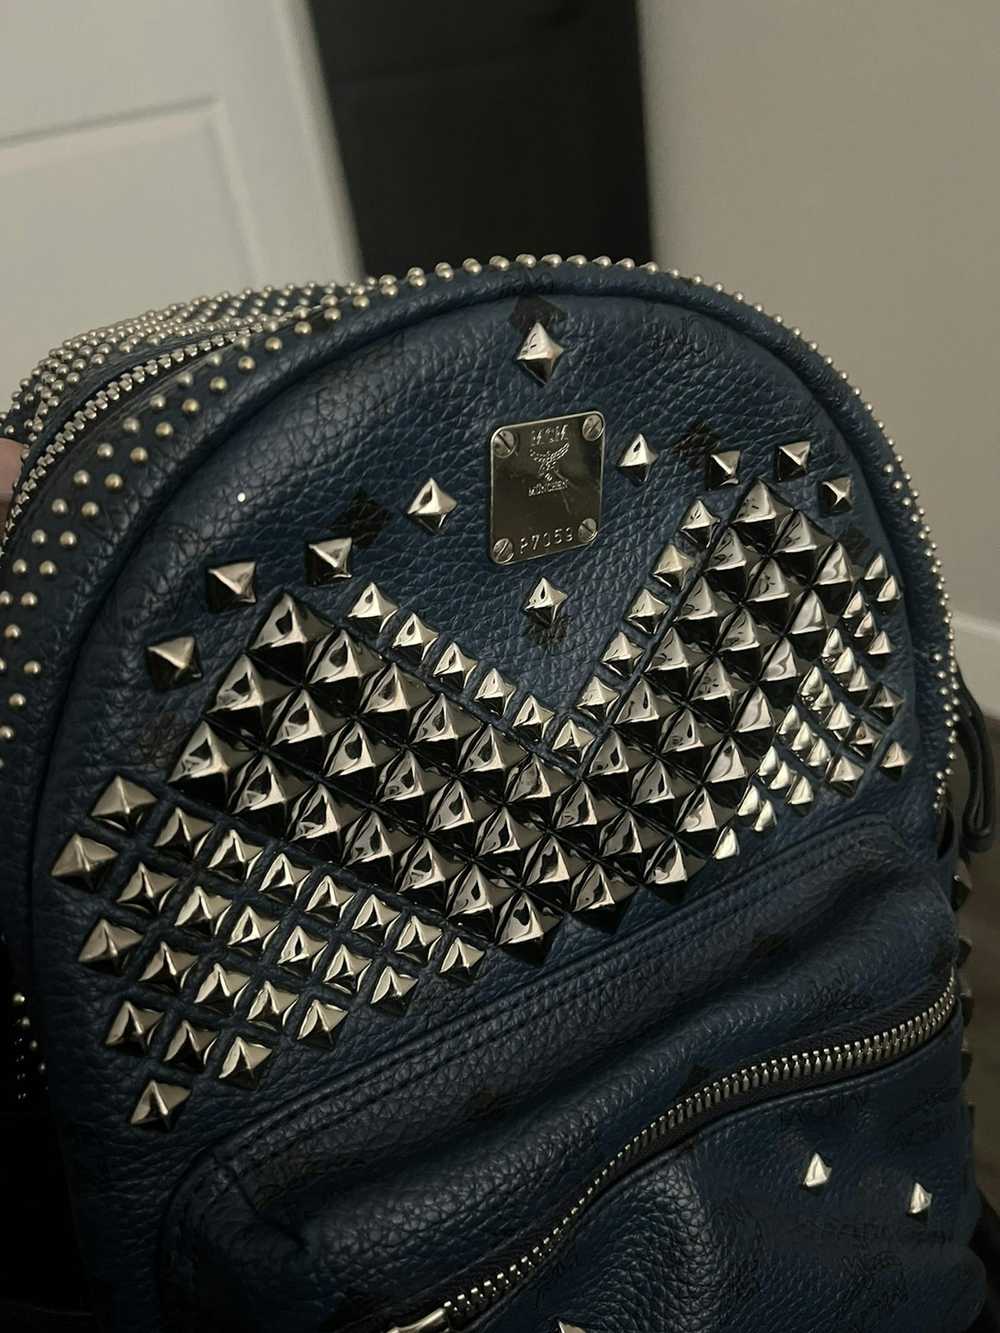 MCM Mcm small studded backpack - image 5